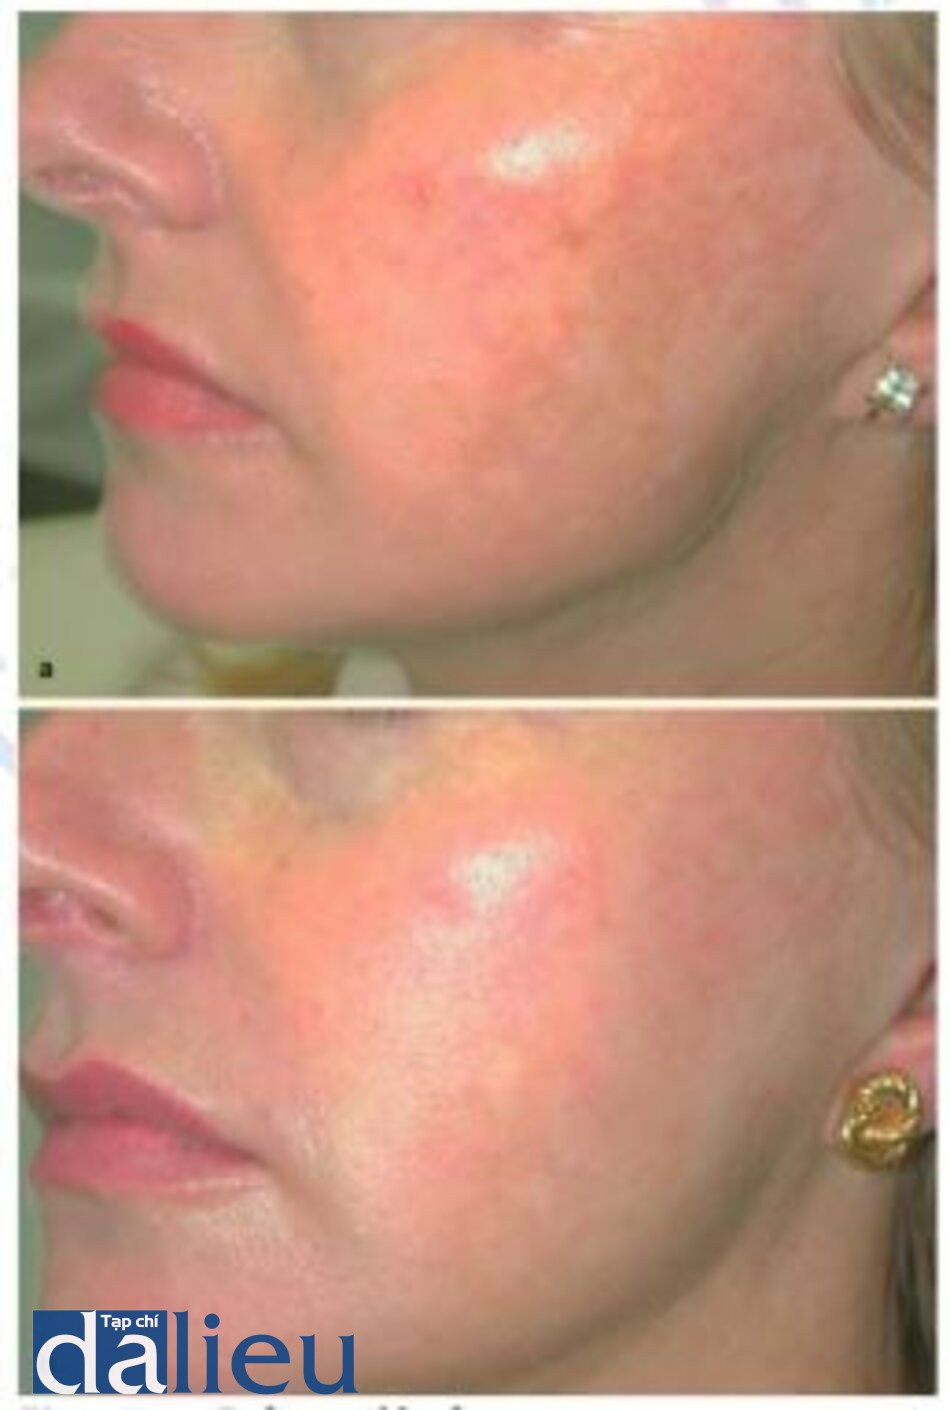 Fig. 1.34. a Before and b after visible light lasers for facial dyschromia